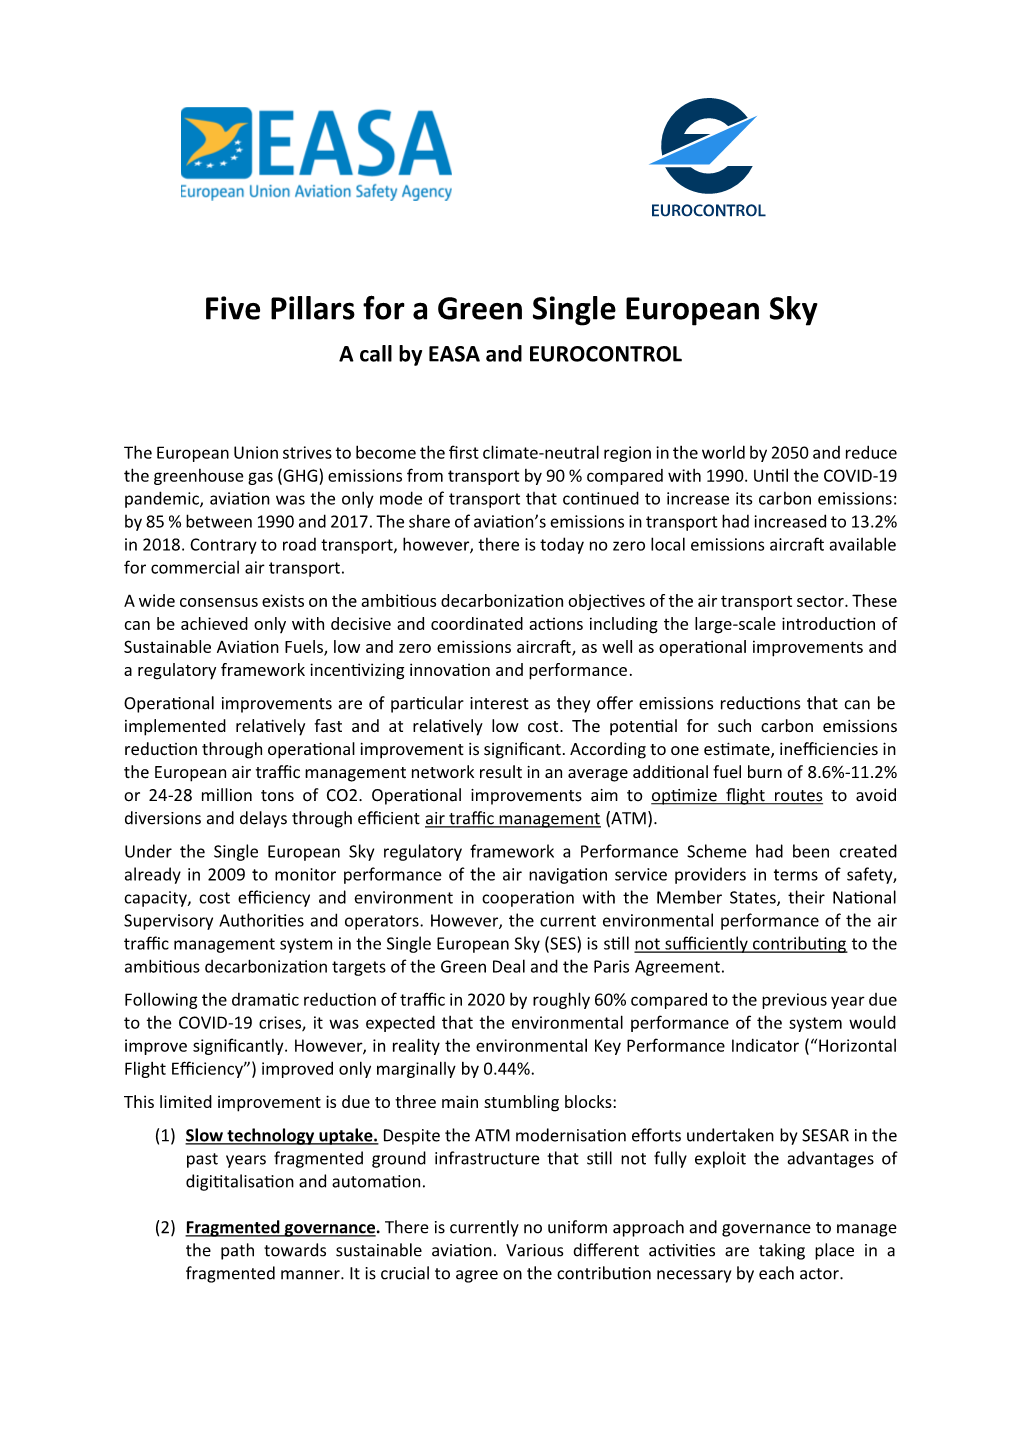 Five Pillars for a Green Single European Sky a Call by EASA and EUROCONTROL